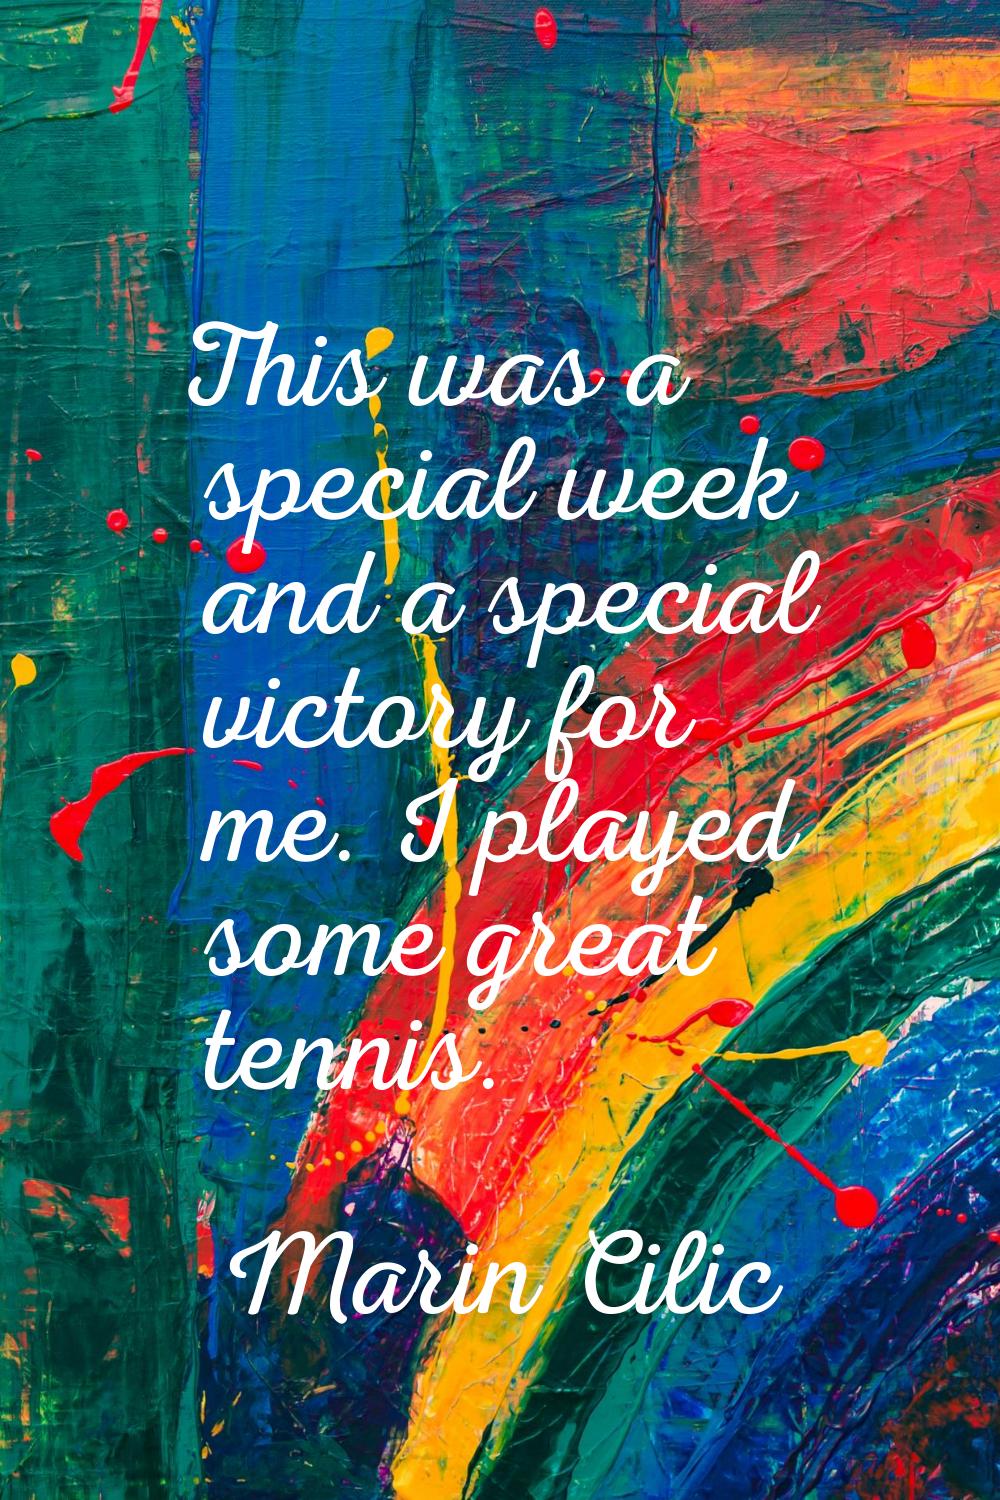 This was a special week and a special victory for me. I played some great tennis.